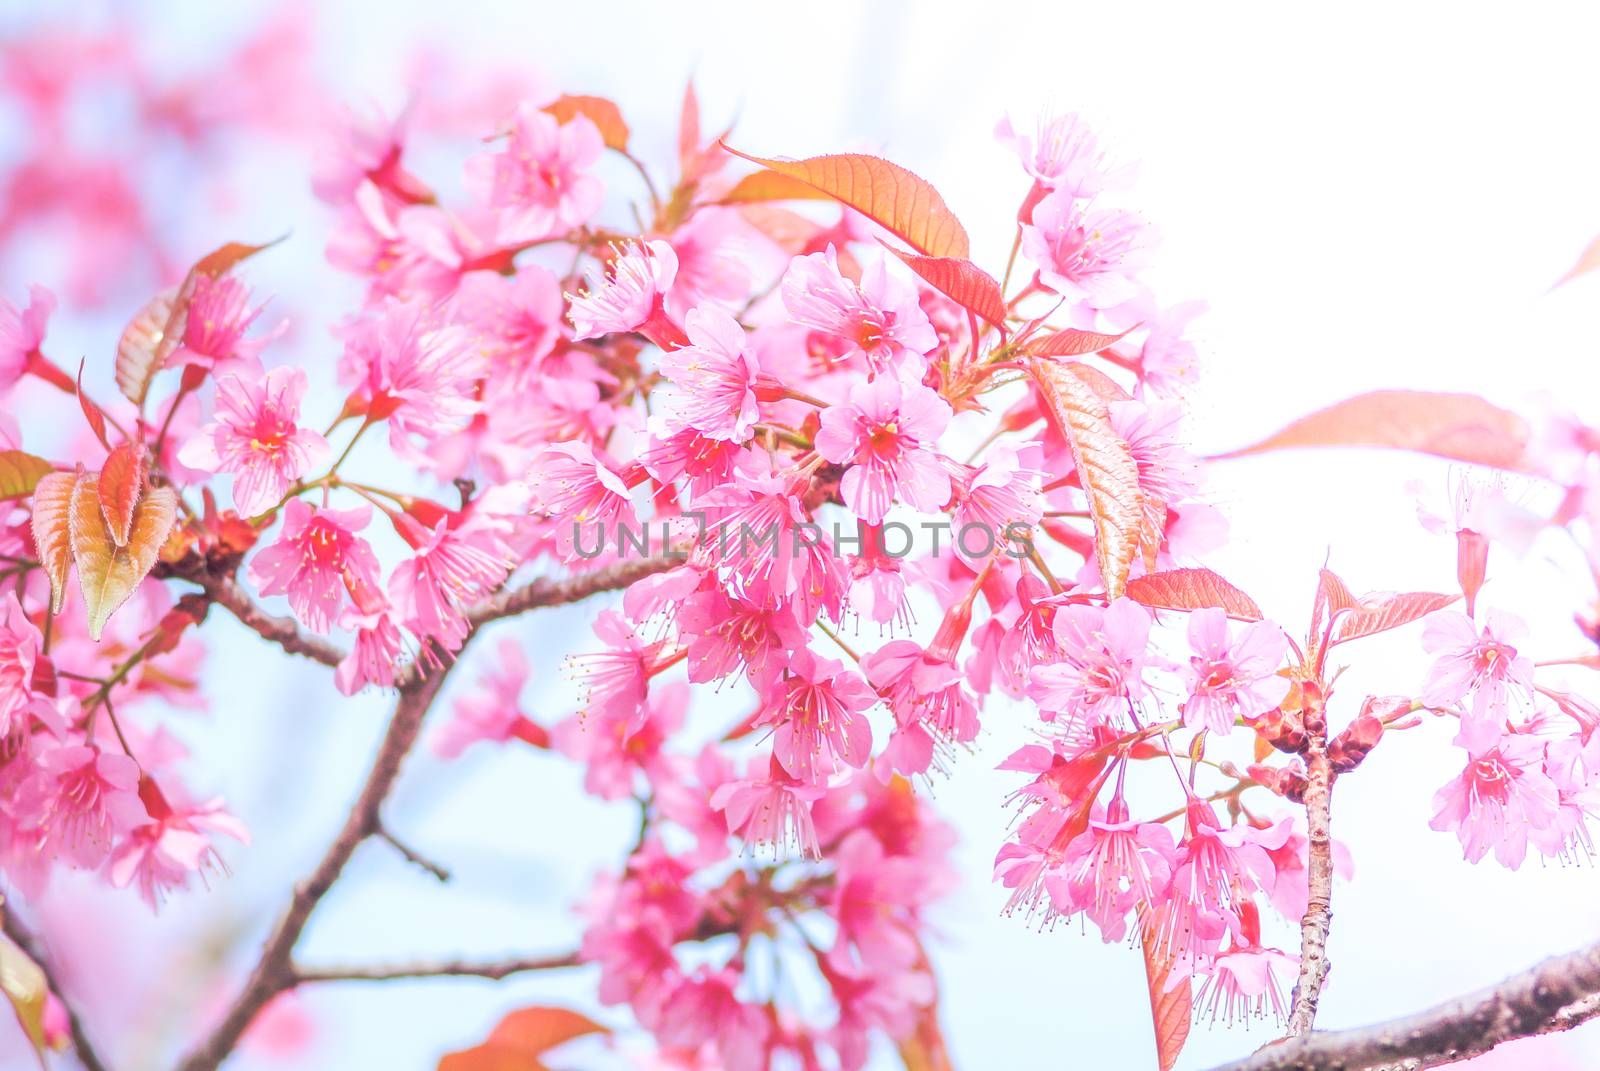 Cherry Blossom in spring with soft focus, unfocused blurred spri by yuiyuize